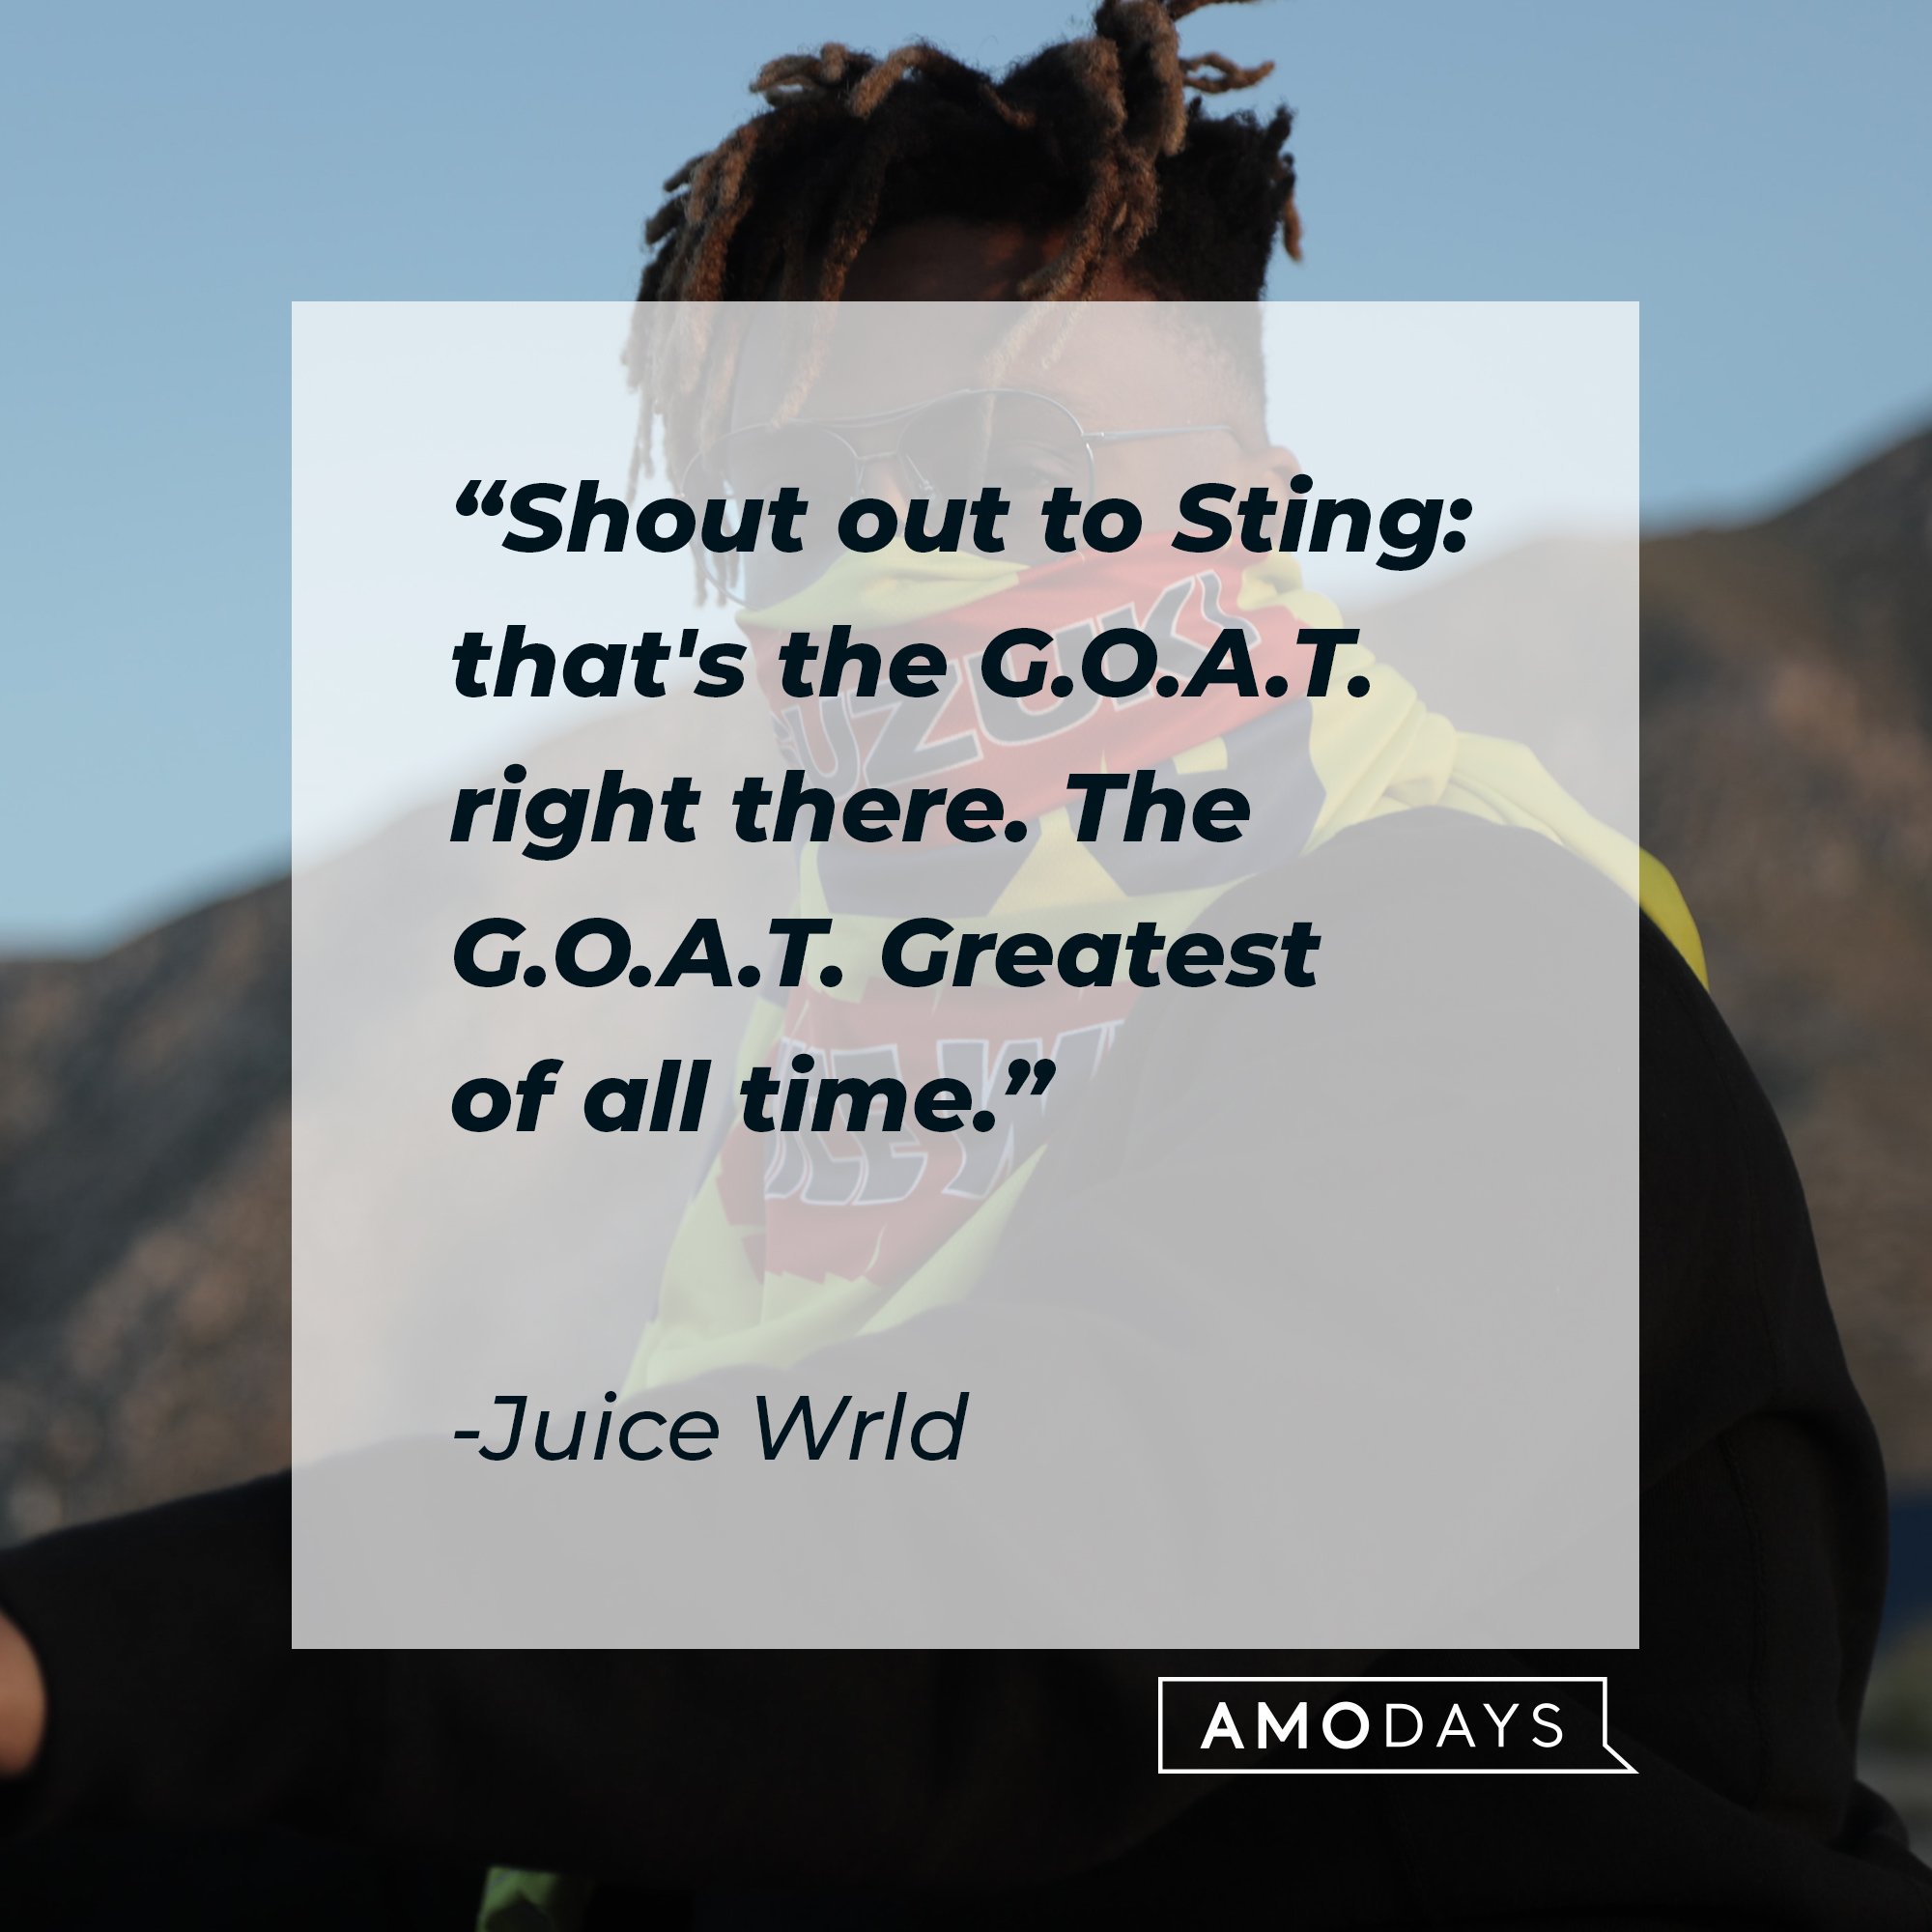 Juice Wrld’s quote: "Shout out to Sting: that's the G.O.A.T. right there. The G.O.A.T. Greatest of all time." | Image: AmoDays 